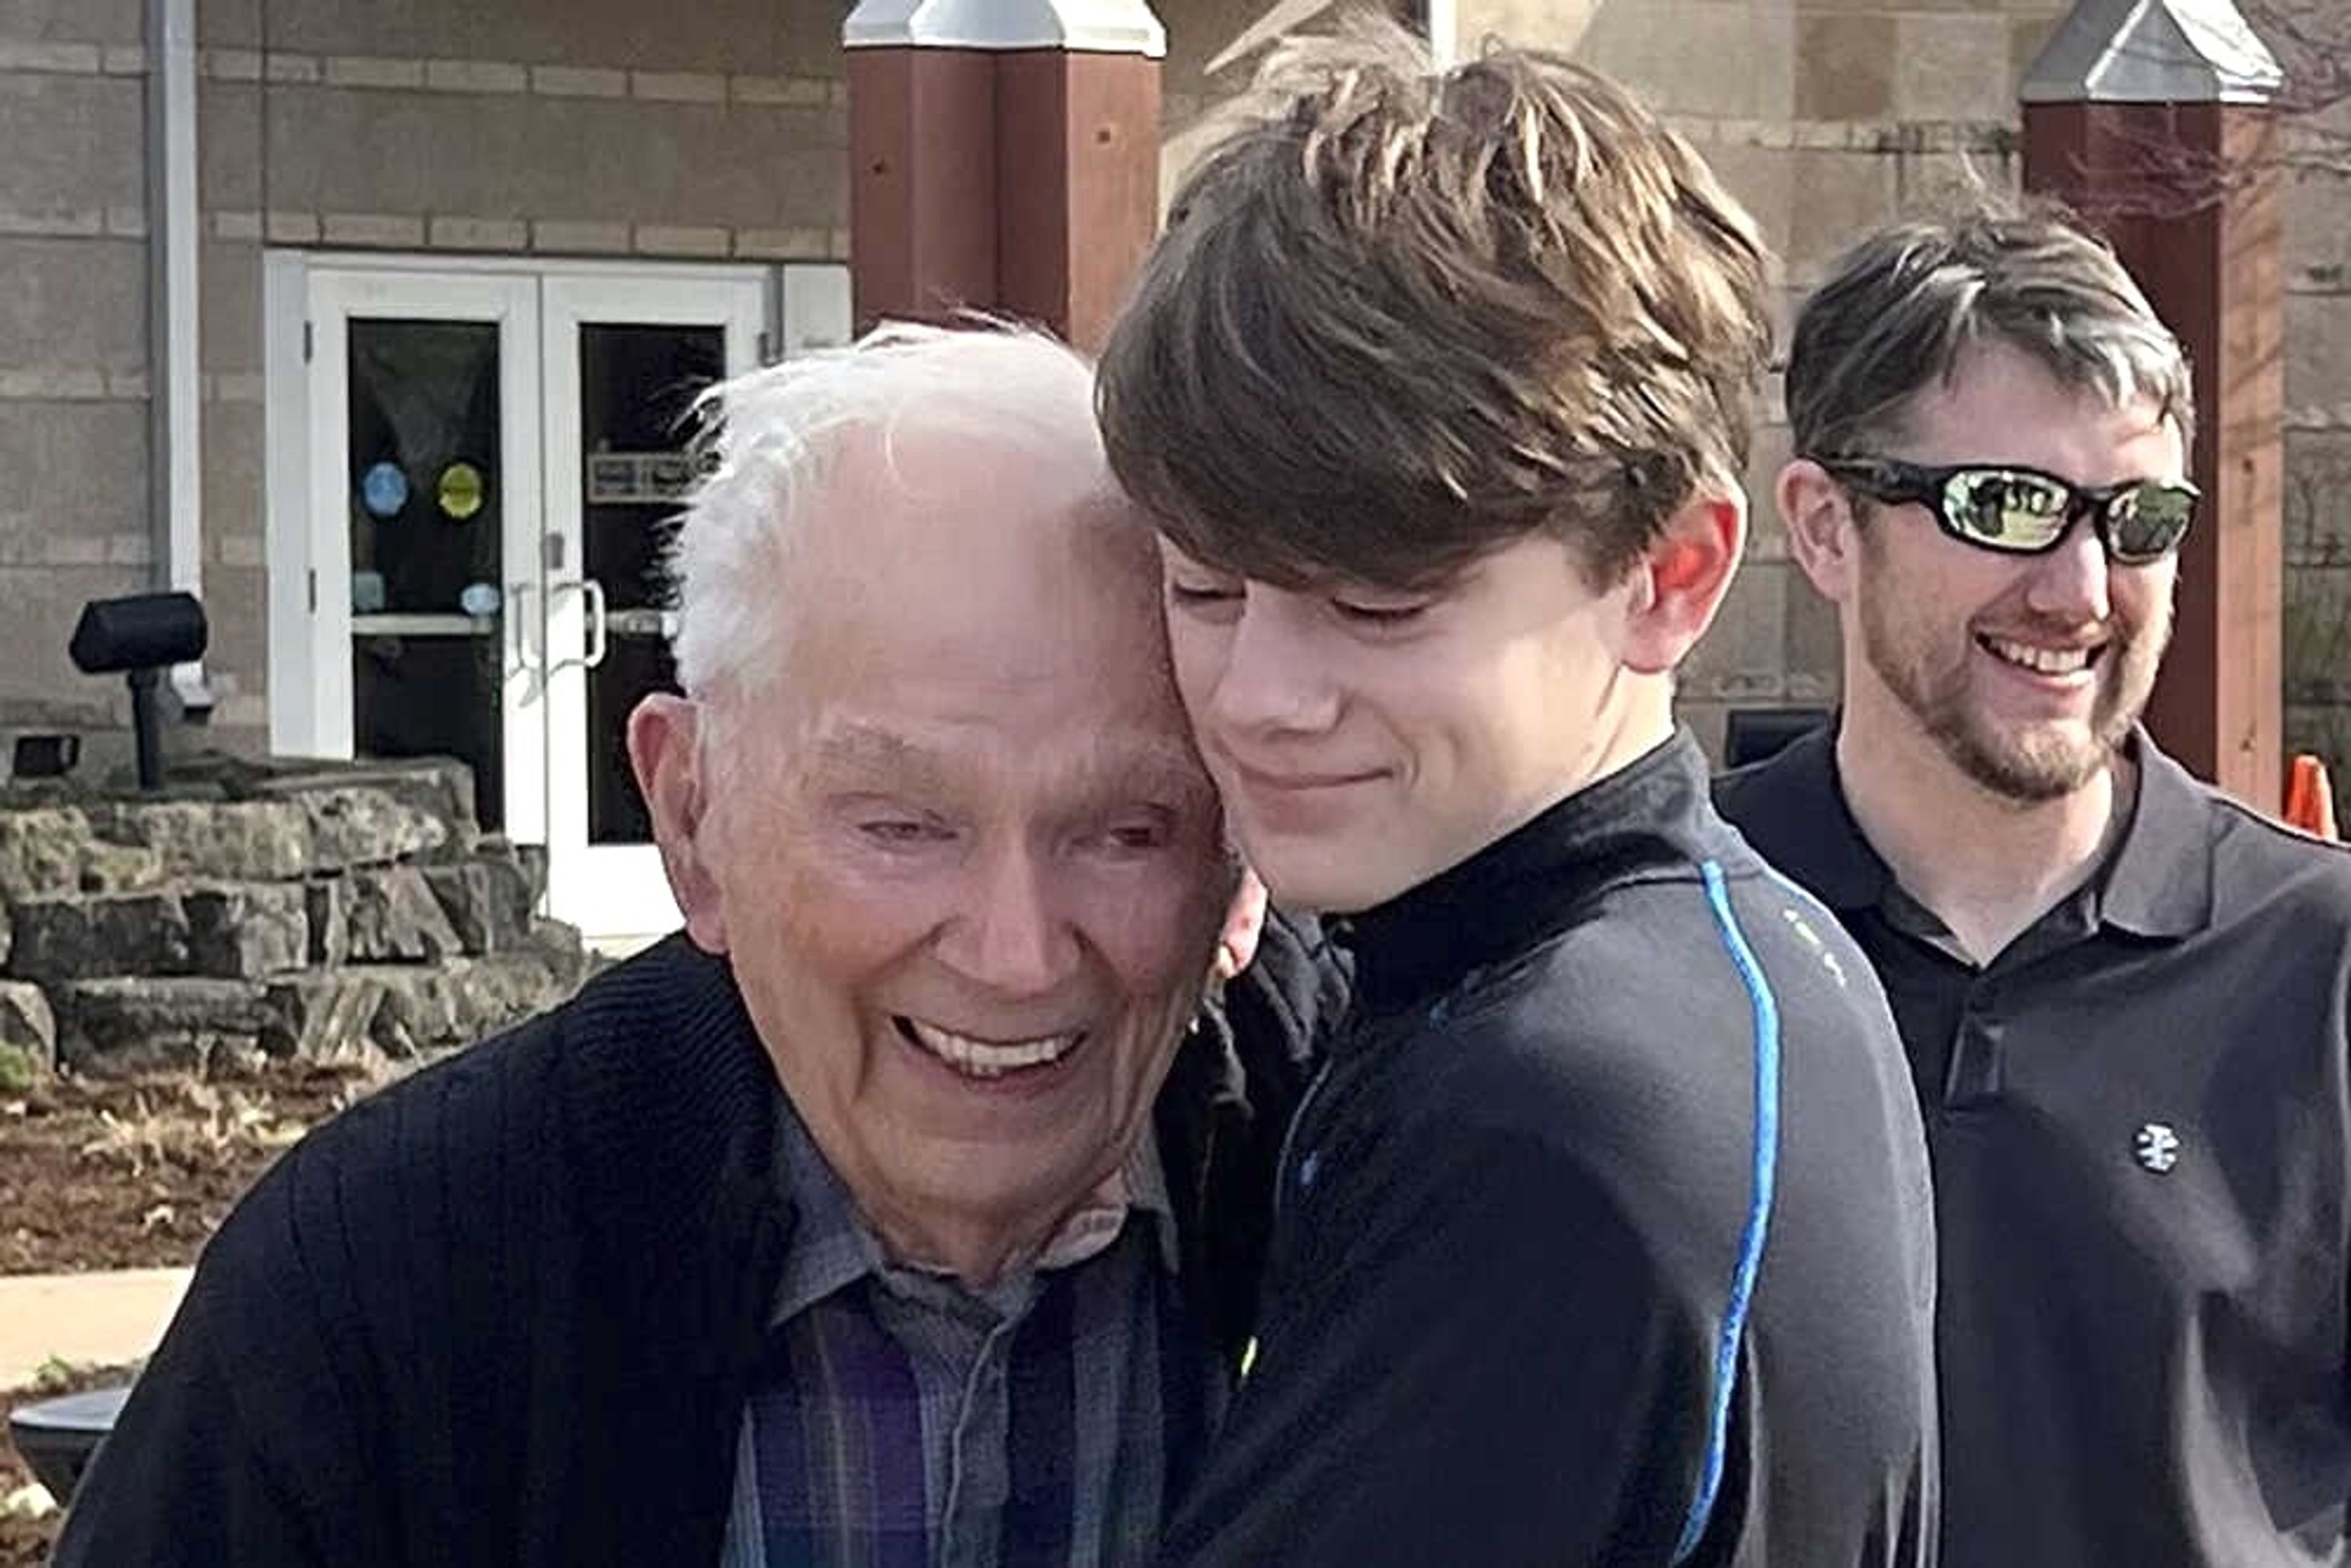 Orville Allen of Poplar Bluff hugs his great-grandson in March. Allen died May 29 and his liver was successfully donated and transplanted to a 72-year-old woman.
